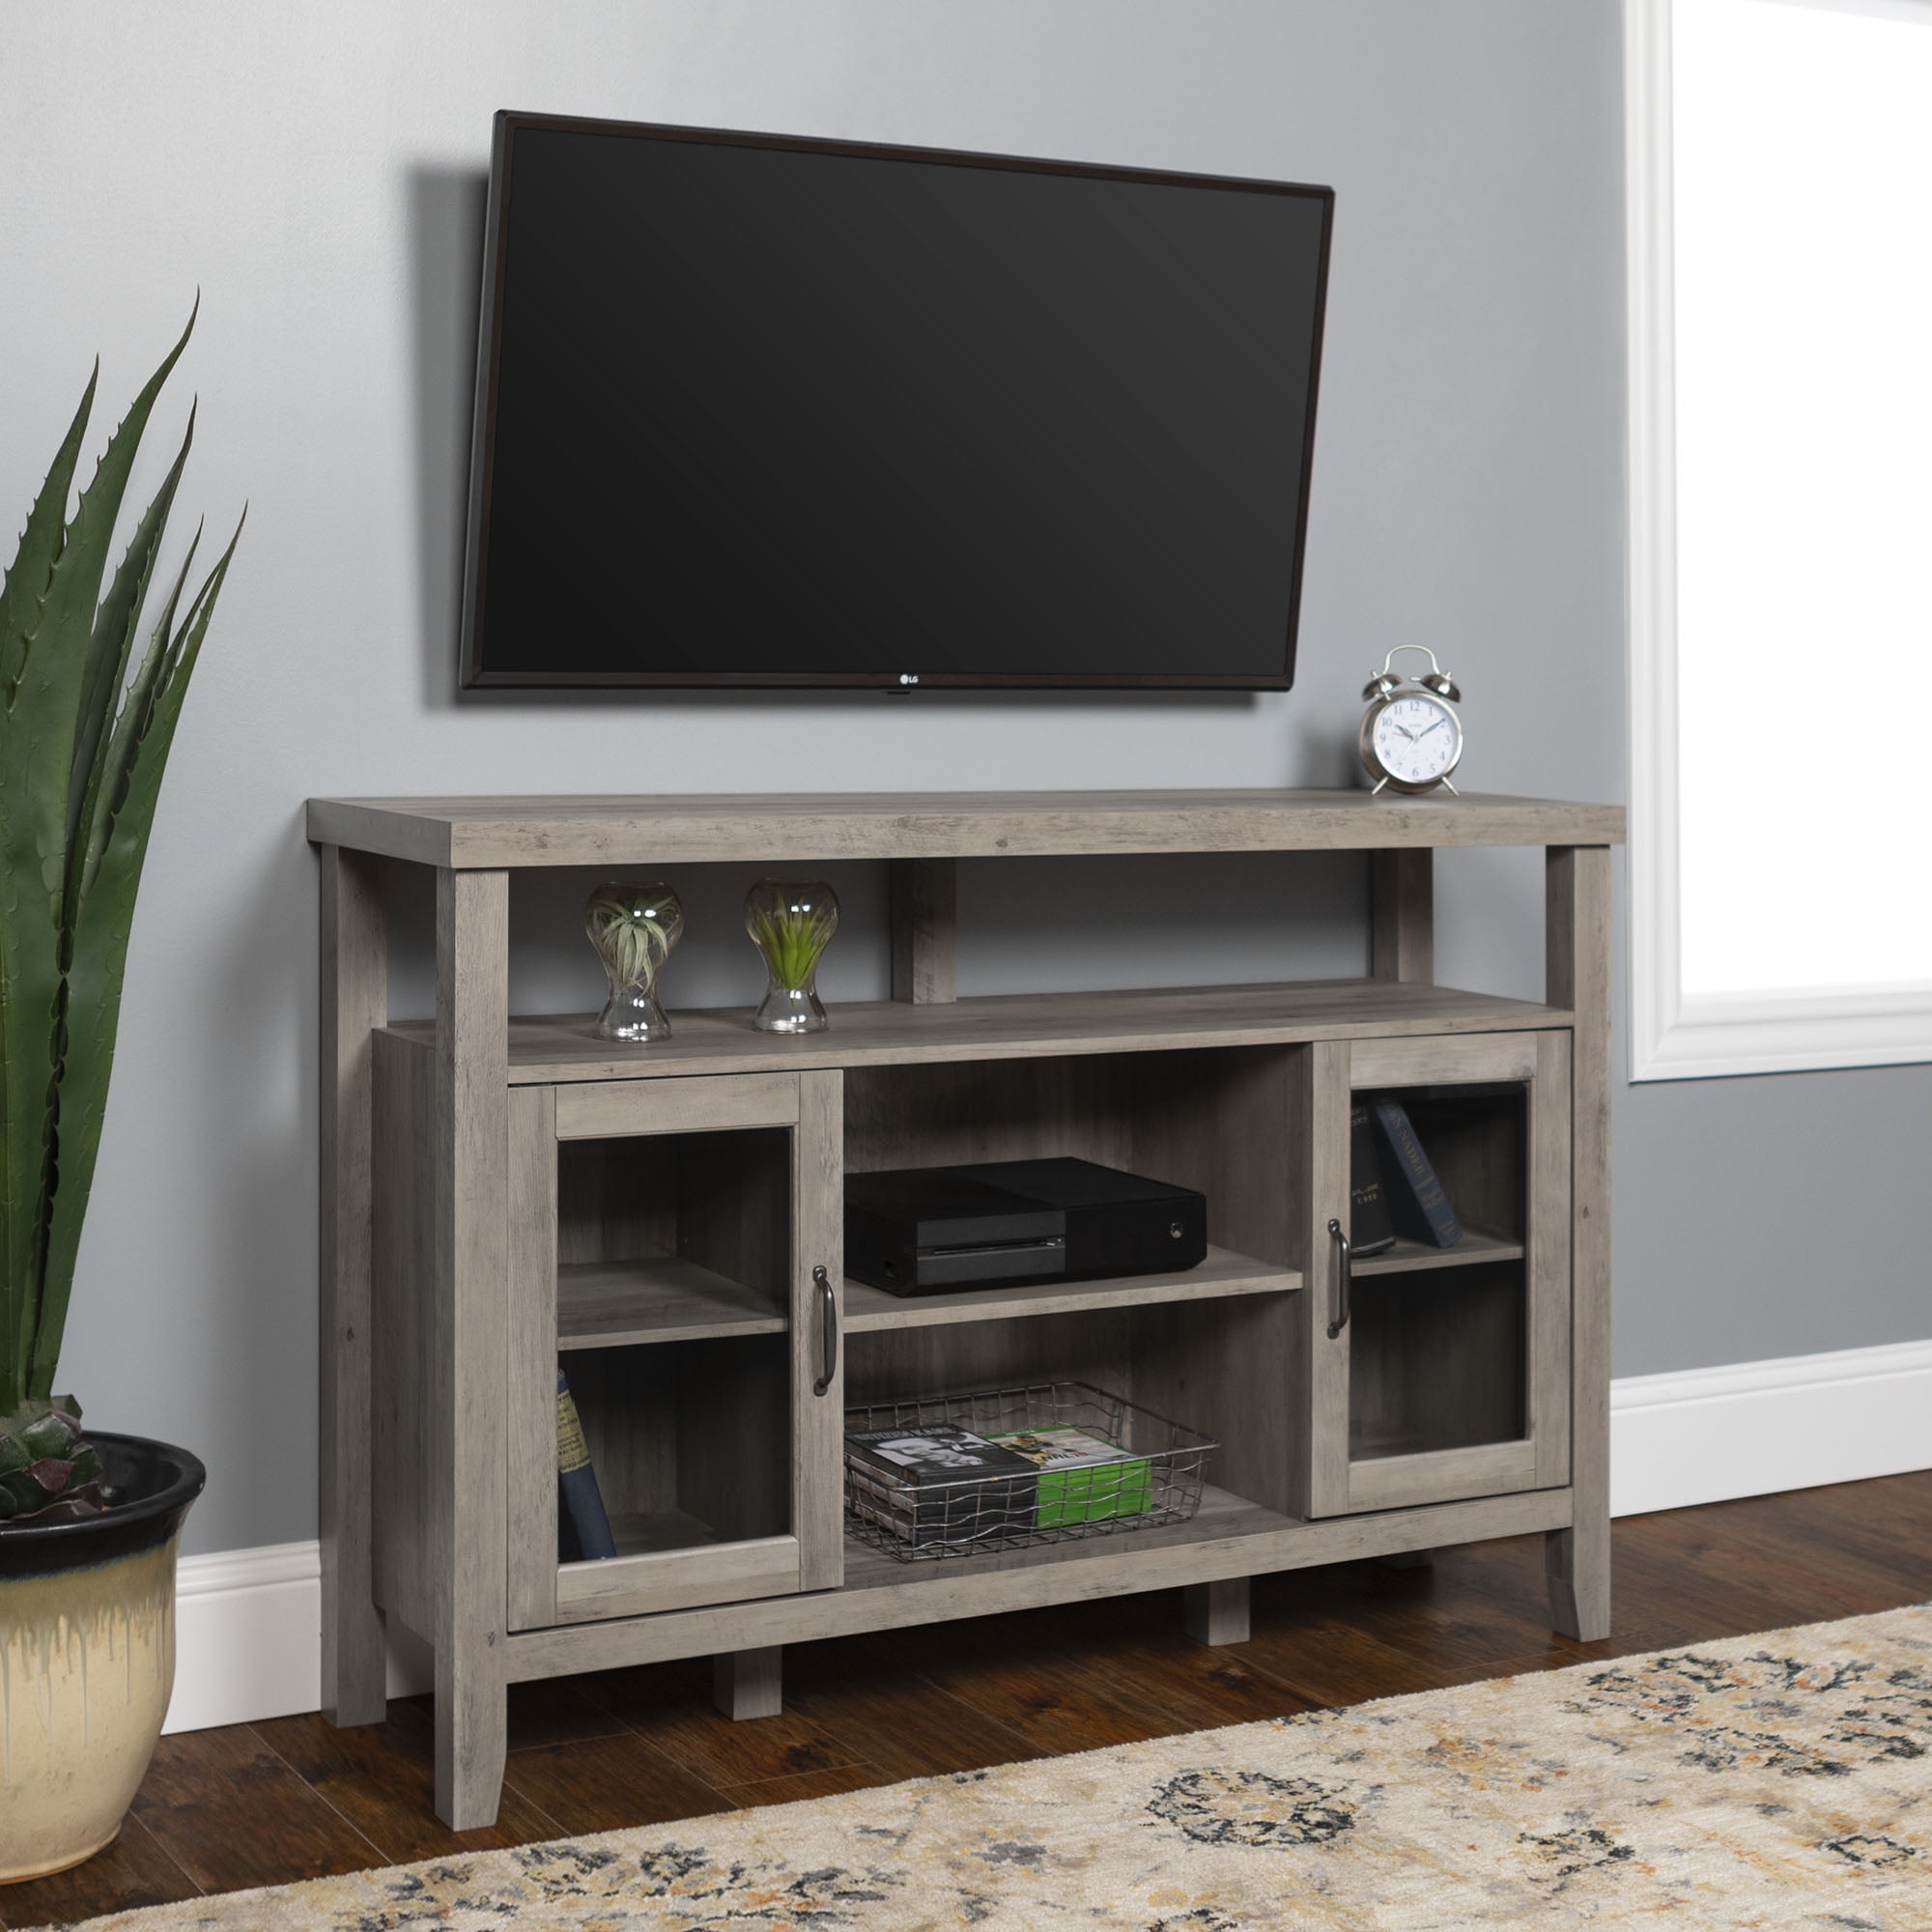 Manor Park Modern Farmhouse Tall TV Stand for TVs up to 55 